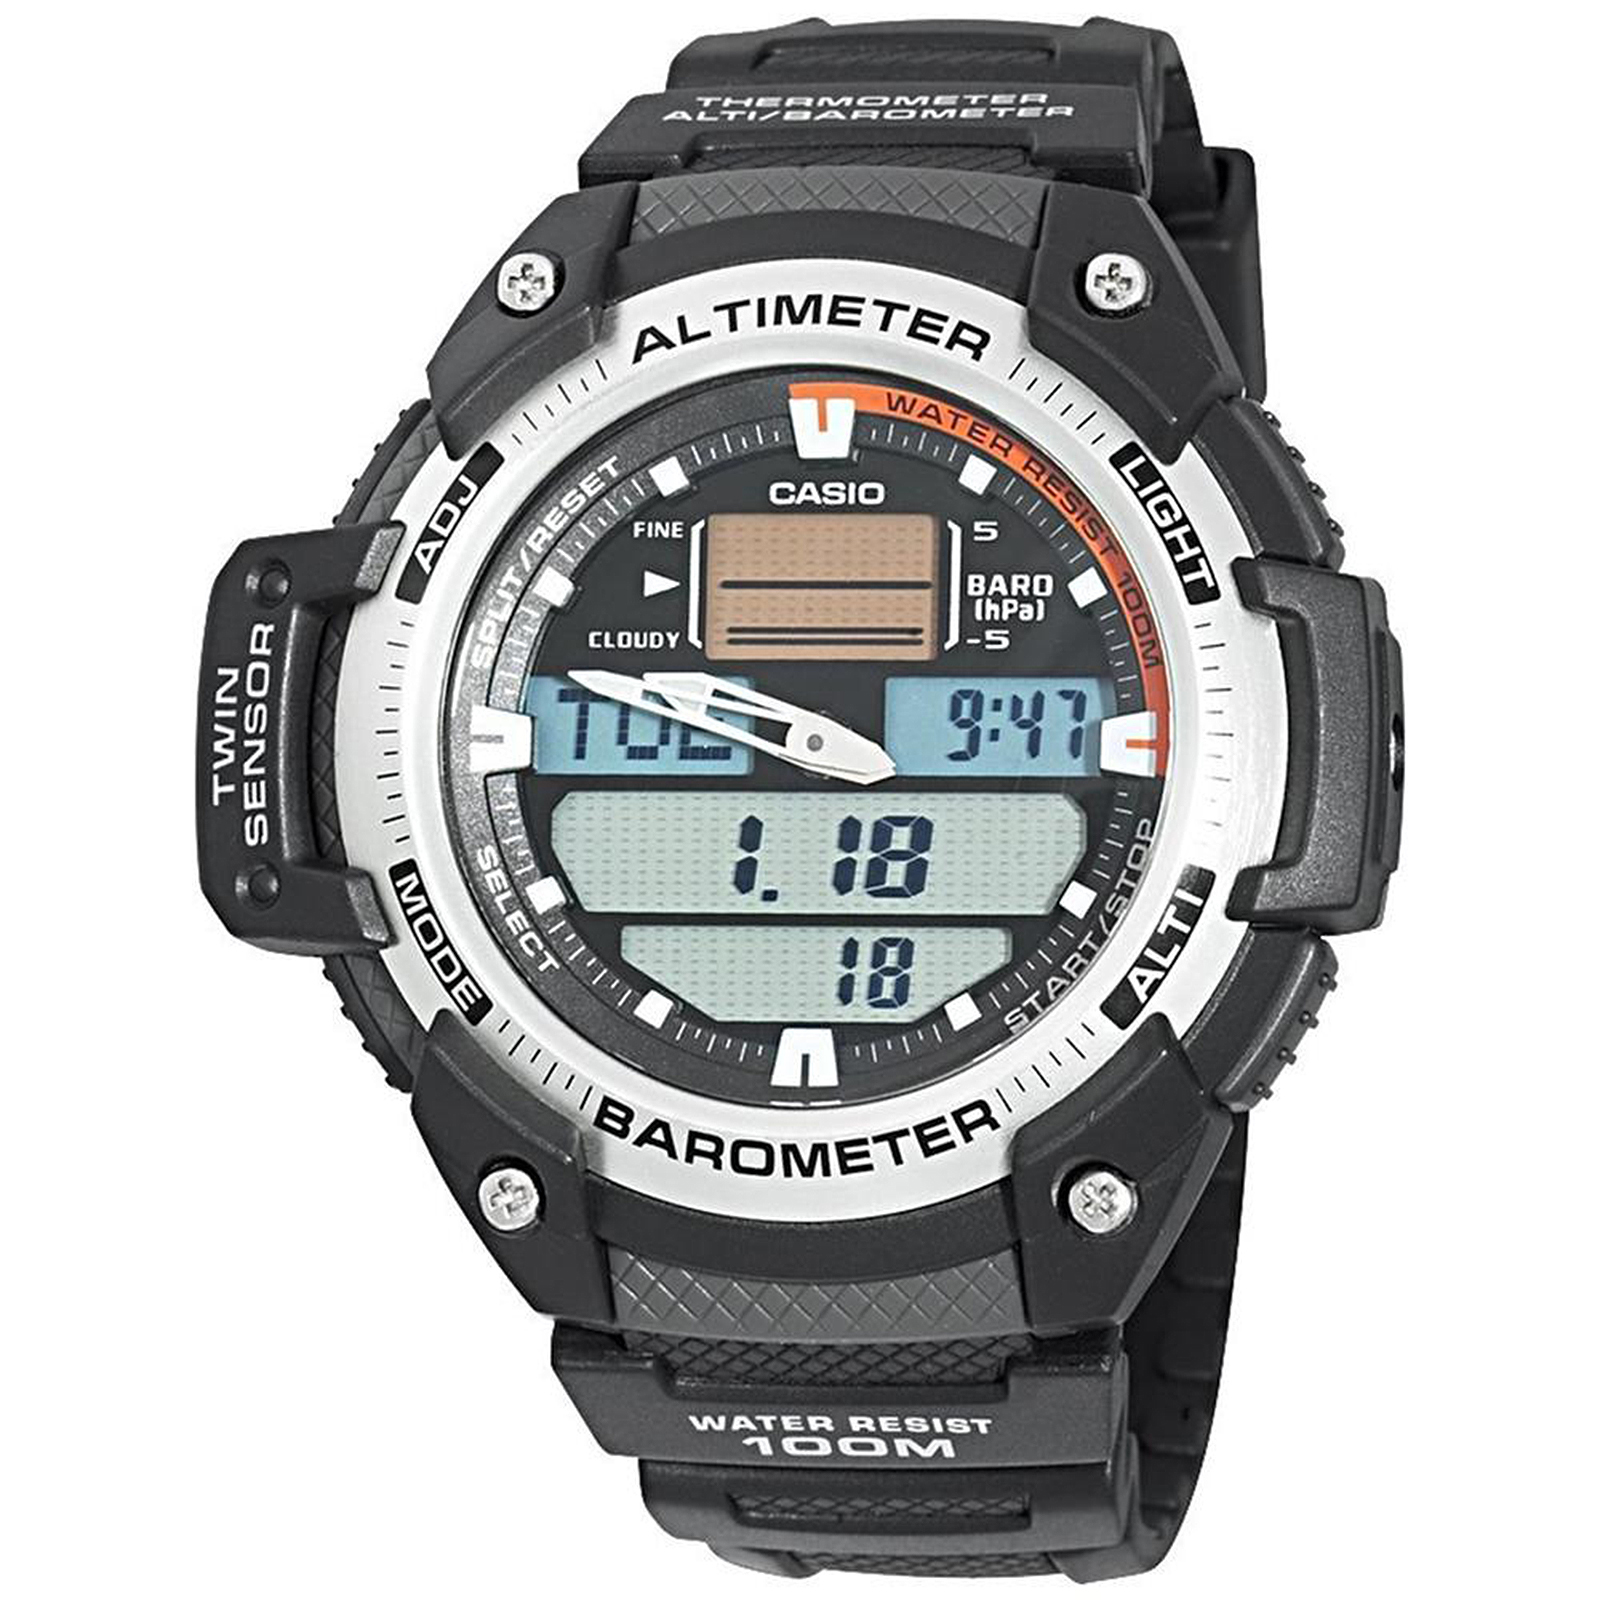 Casio SGW400H1BV Men’s Sports Digital Watch with Thermo-Sensor